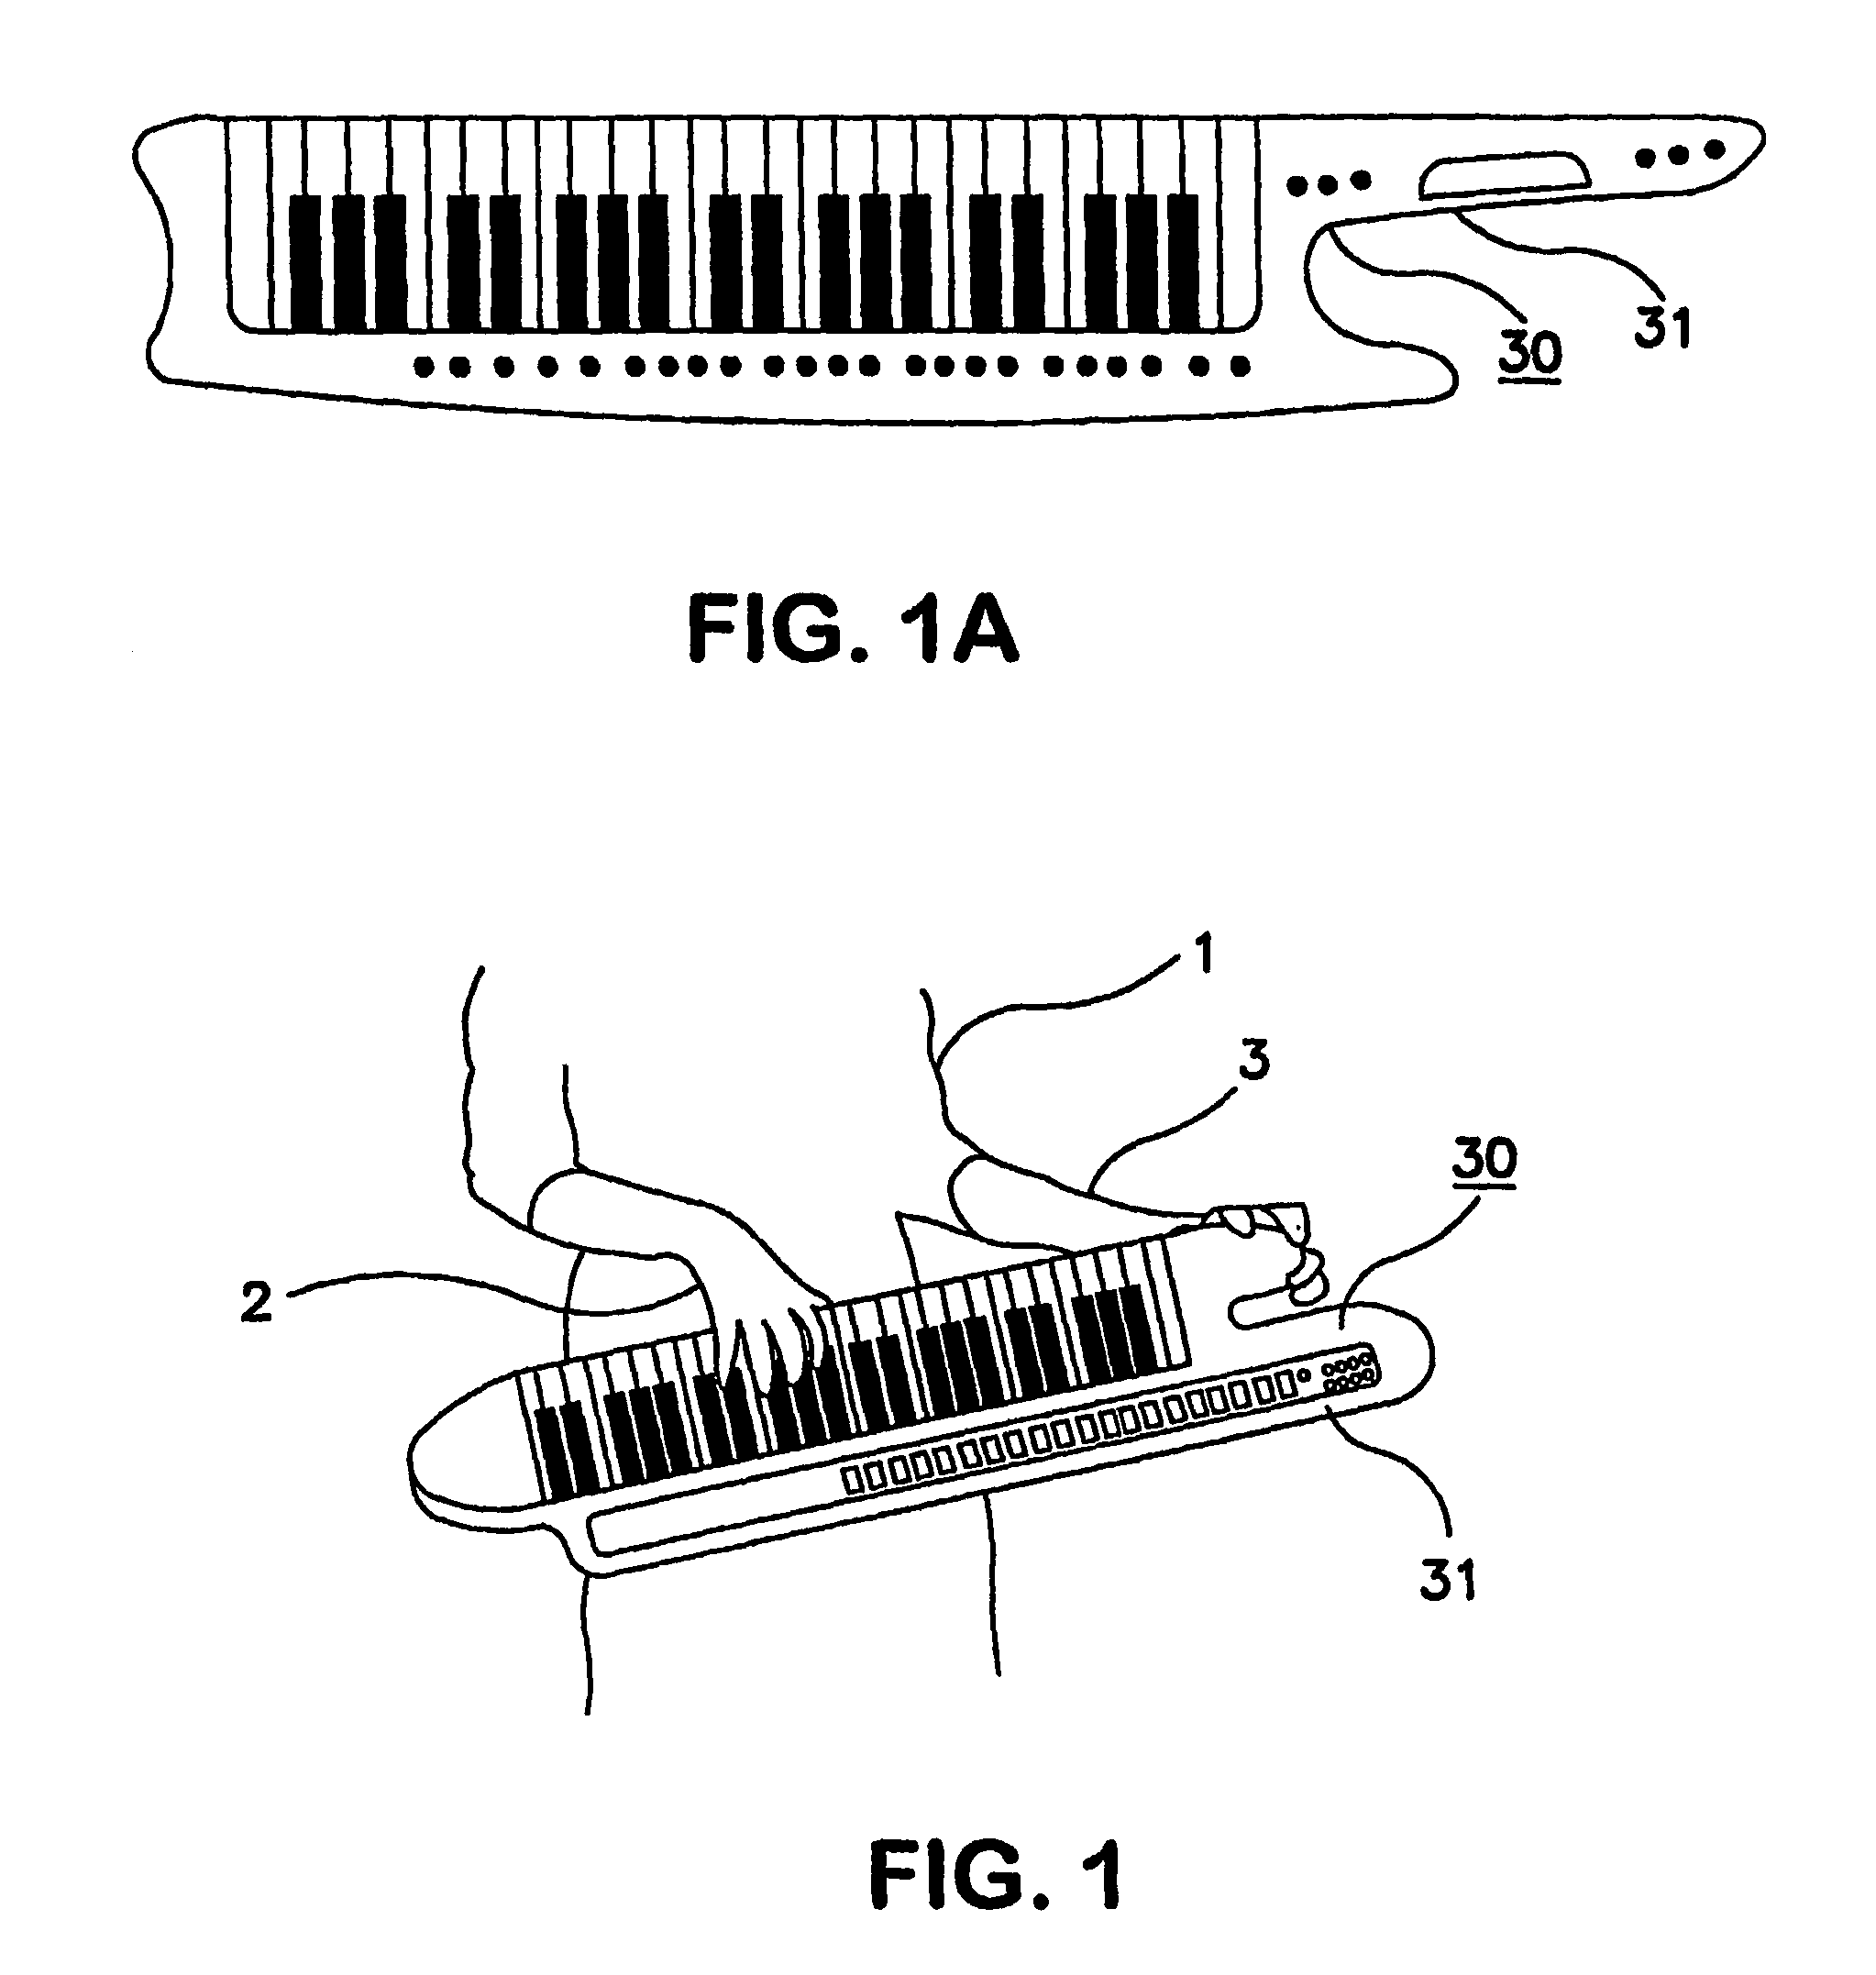 Inverted keyboard instrument and method of playing the same